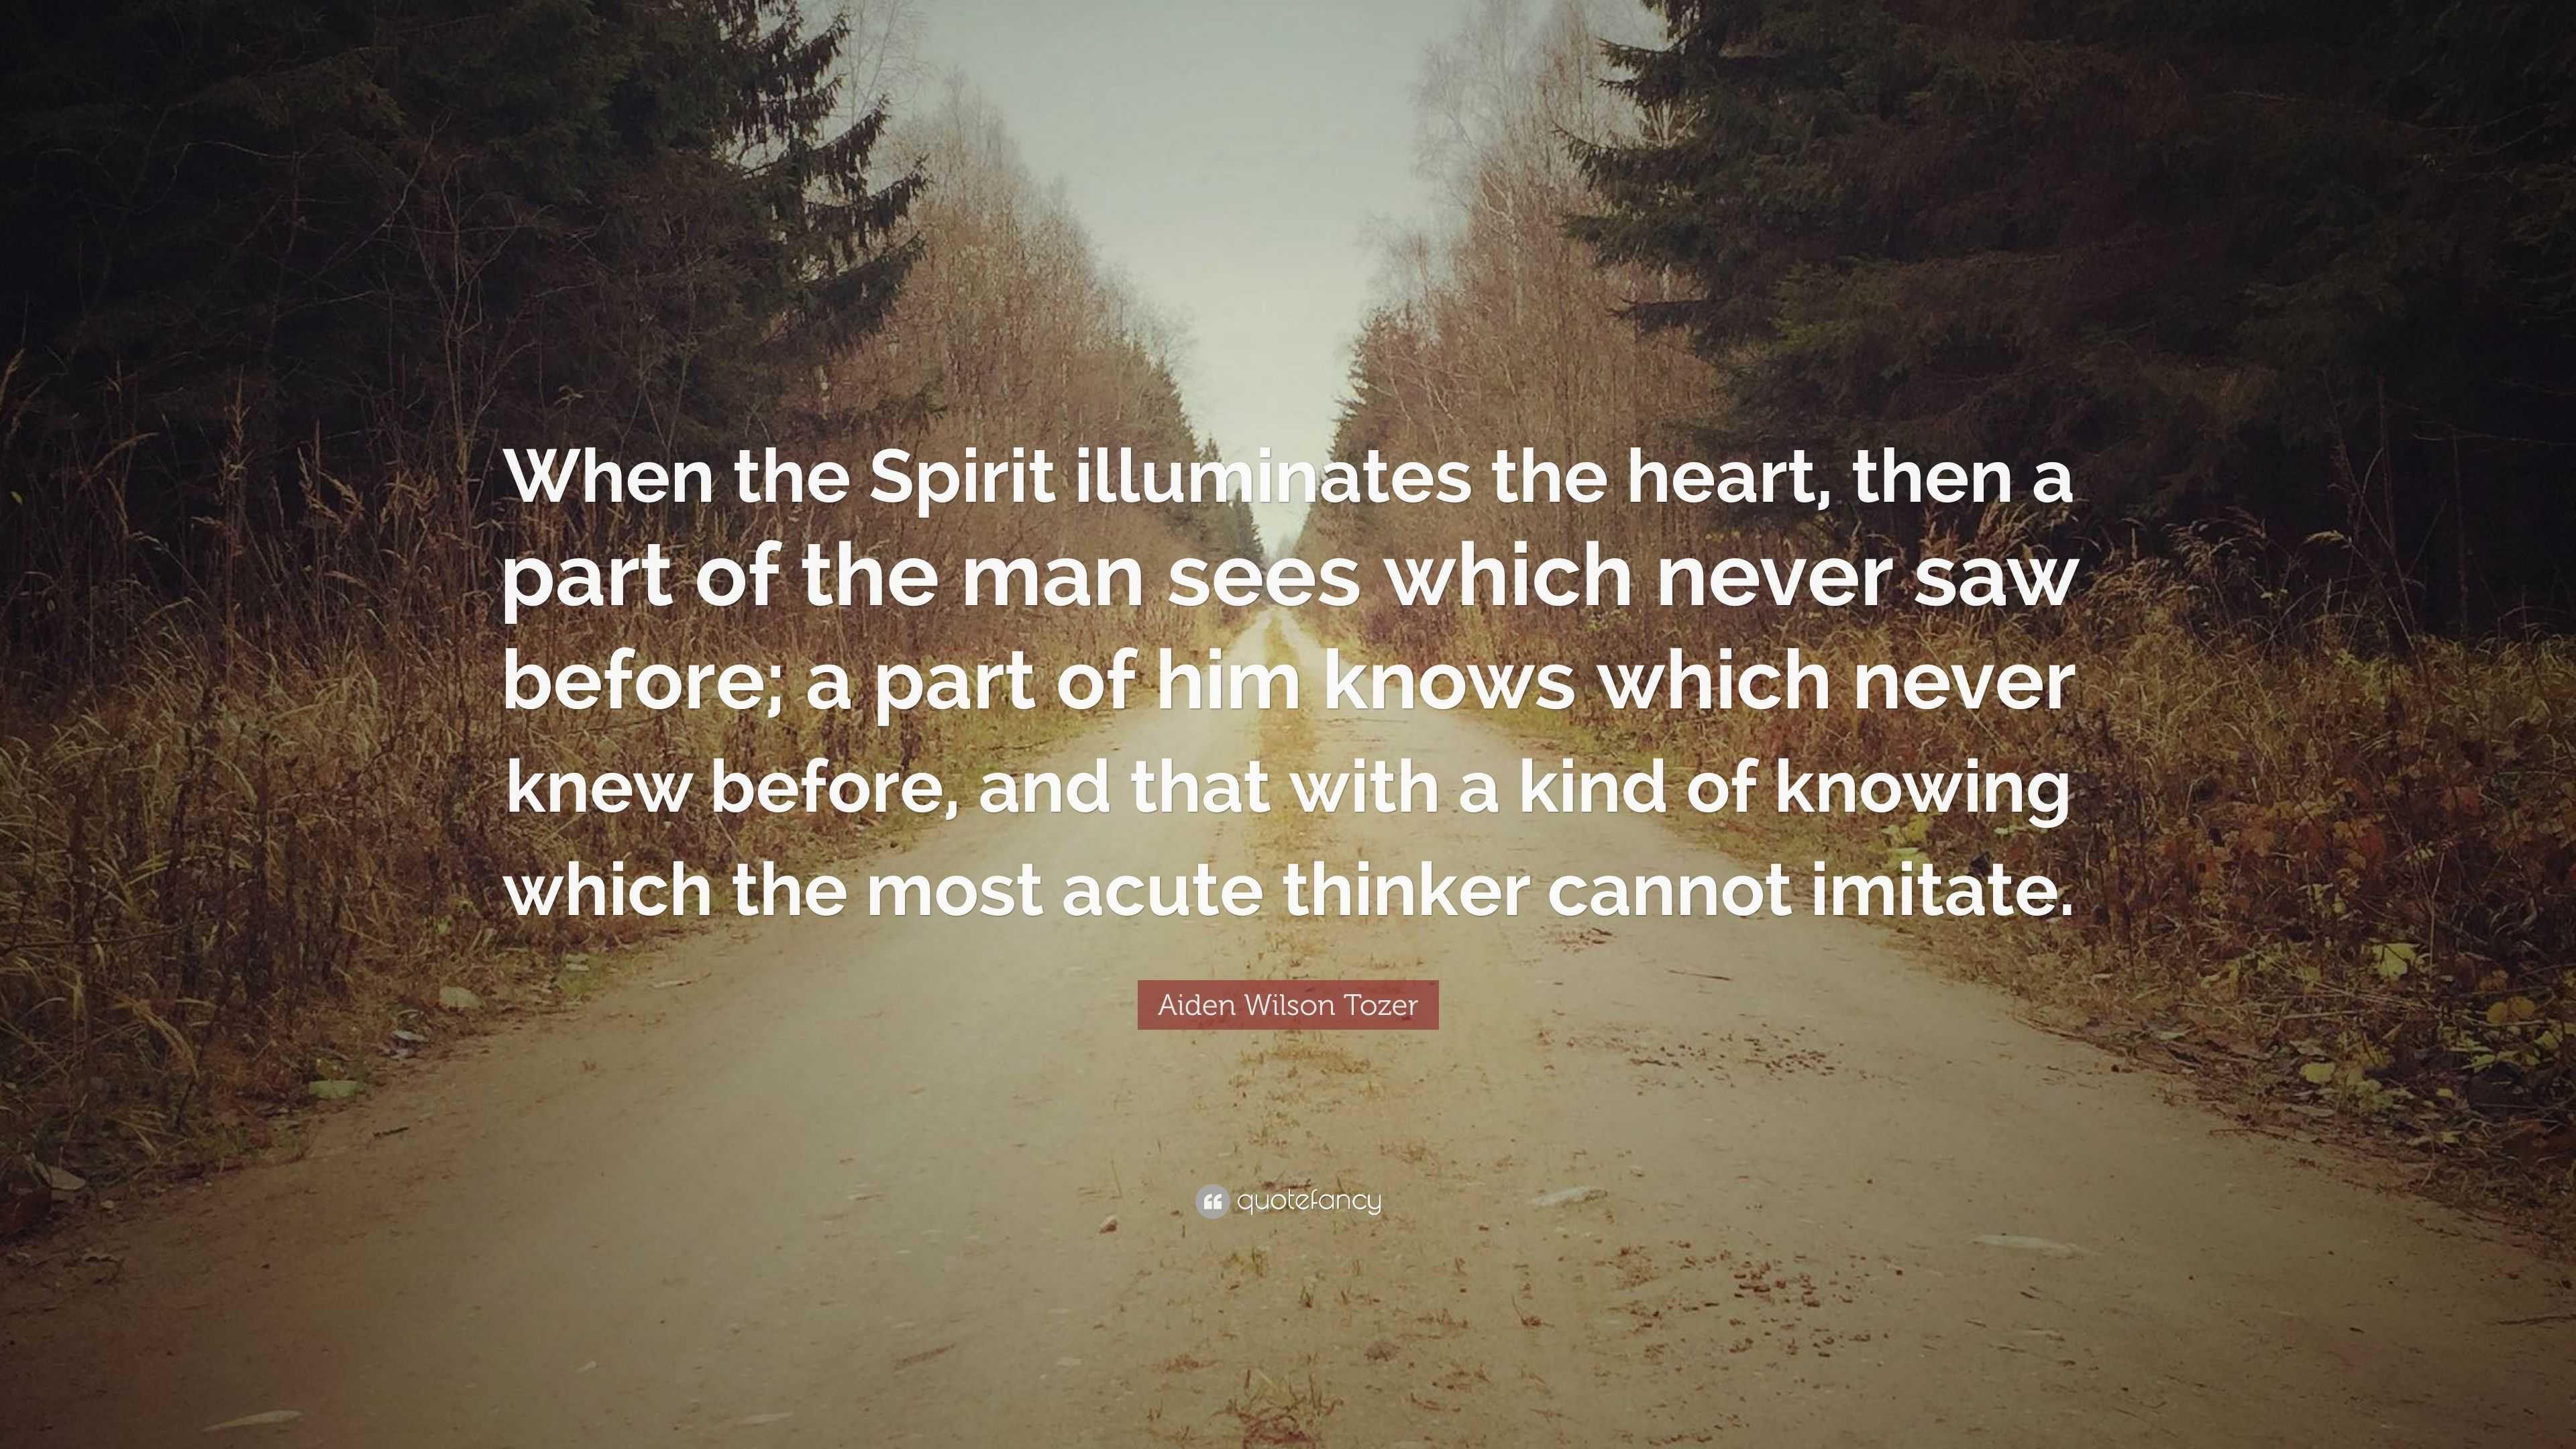 Aiden Wilson Tozer Quote: “When the Spirit illuminates the heart, then a  part of the man sees which never saw before; a part of him knows which  nev...”